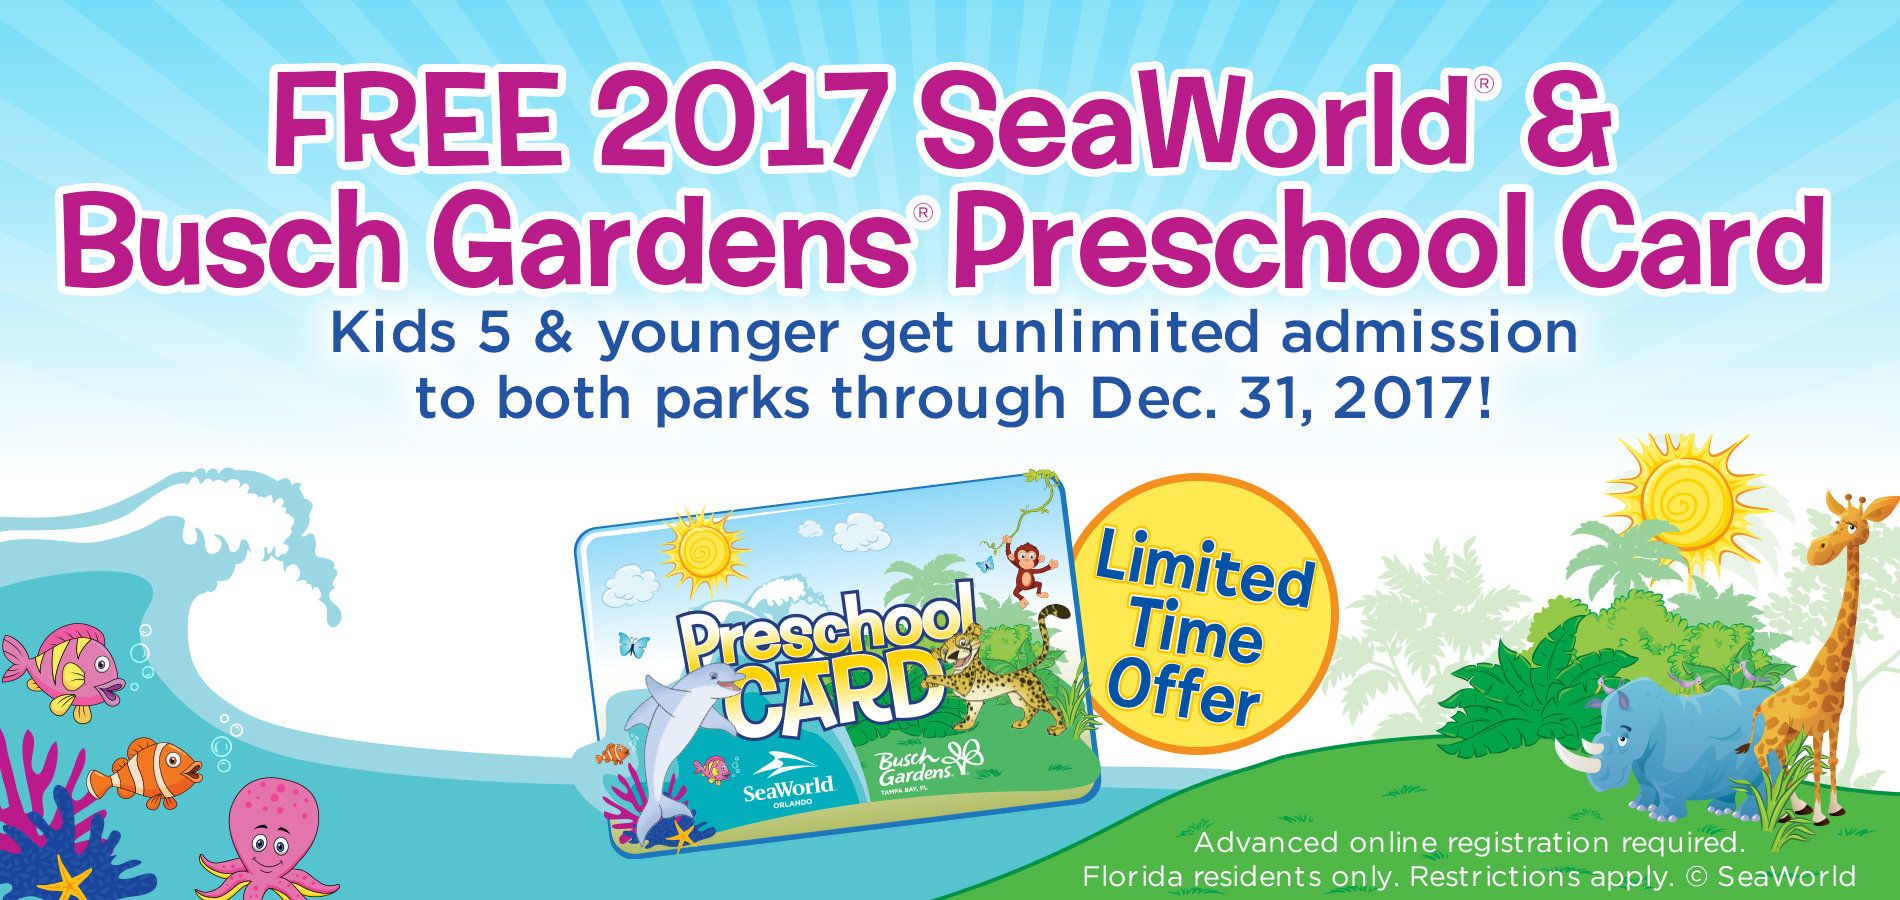 Preschool card offers free admission to SeaWorld and Busch Gardens!